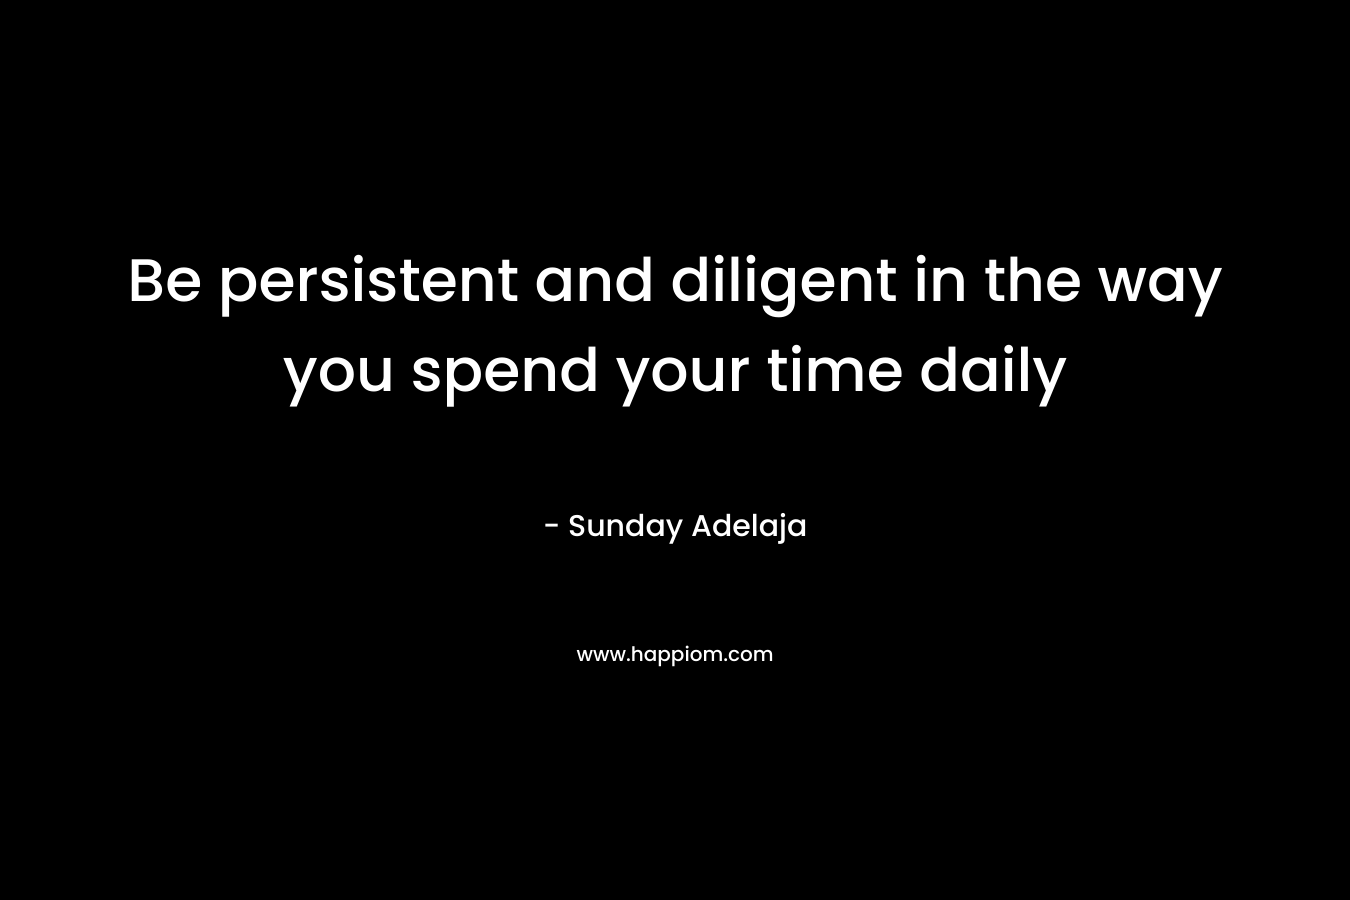 Be persistent and diligent in the way you spend your time daily